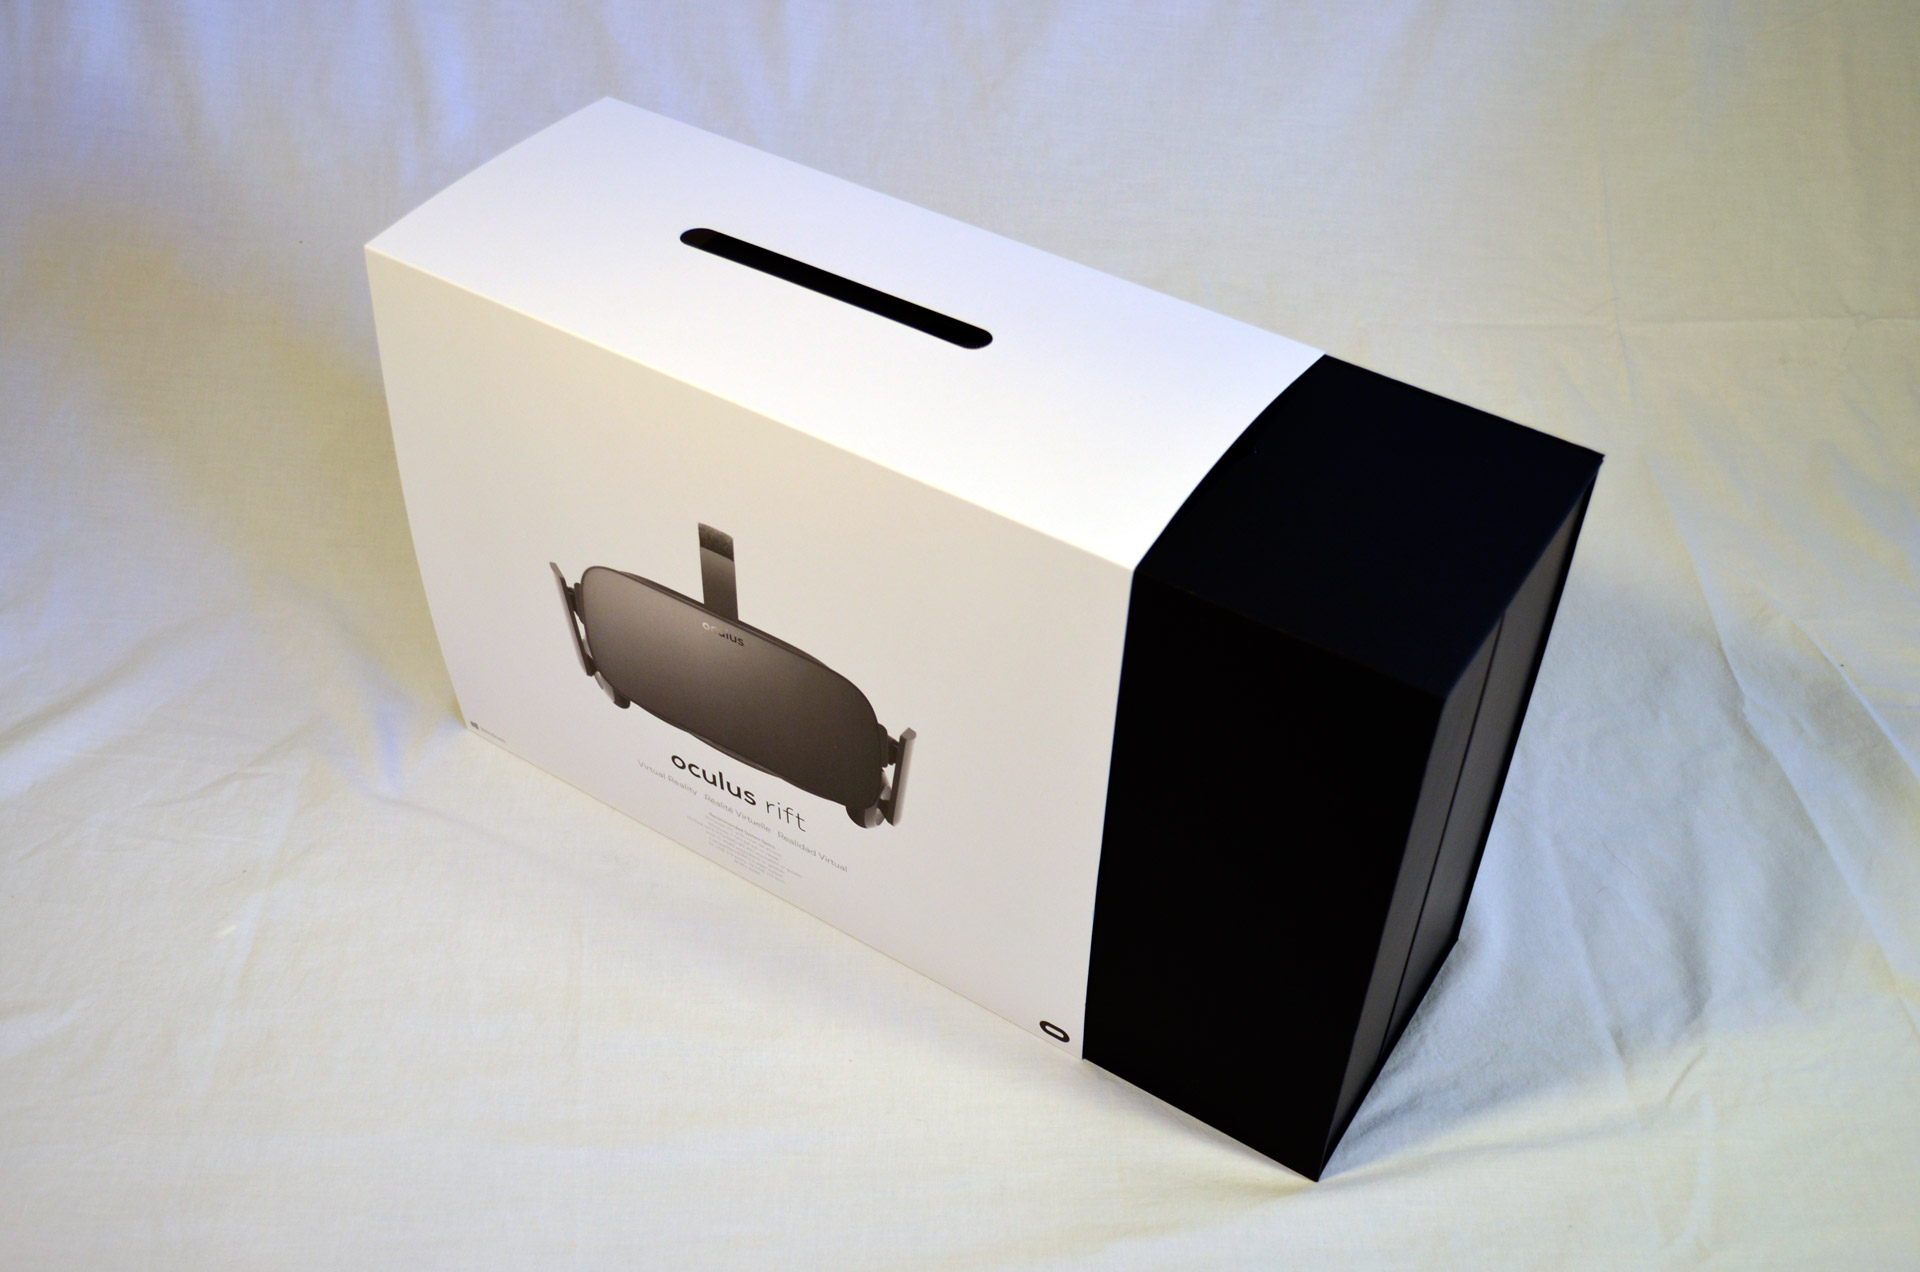 Some Oculus Rift Shipping Ahead of Delay Estimates